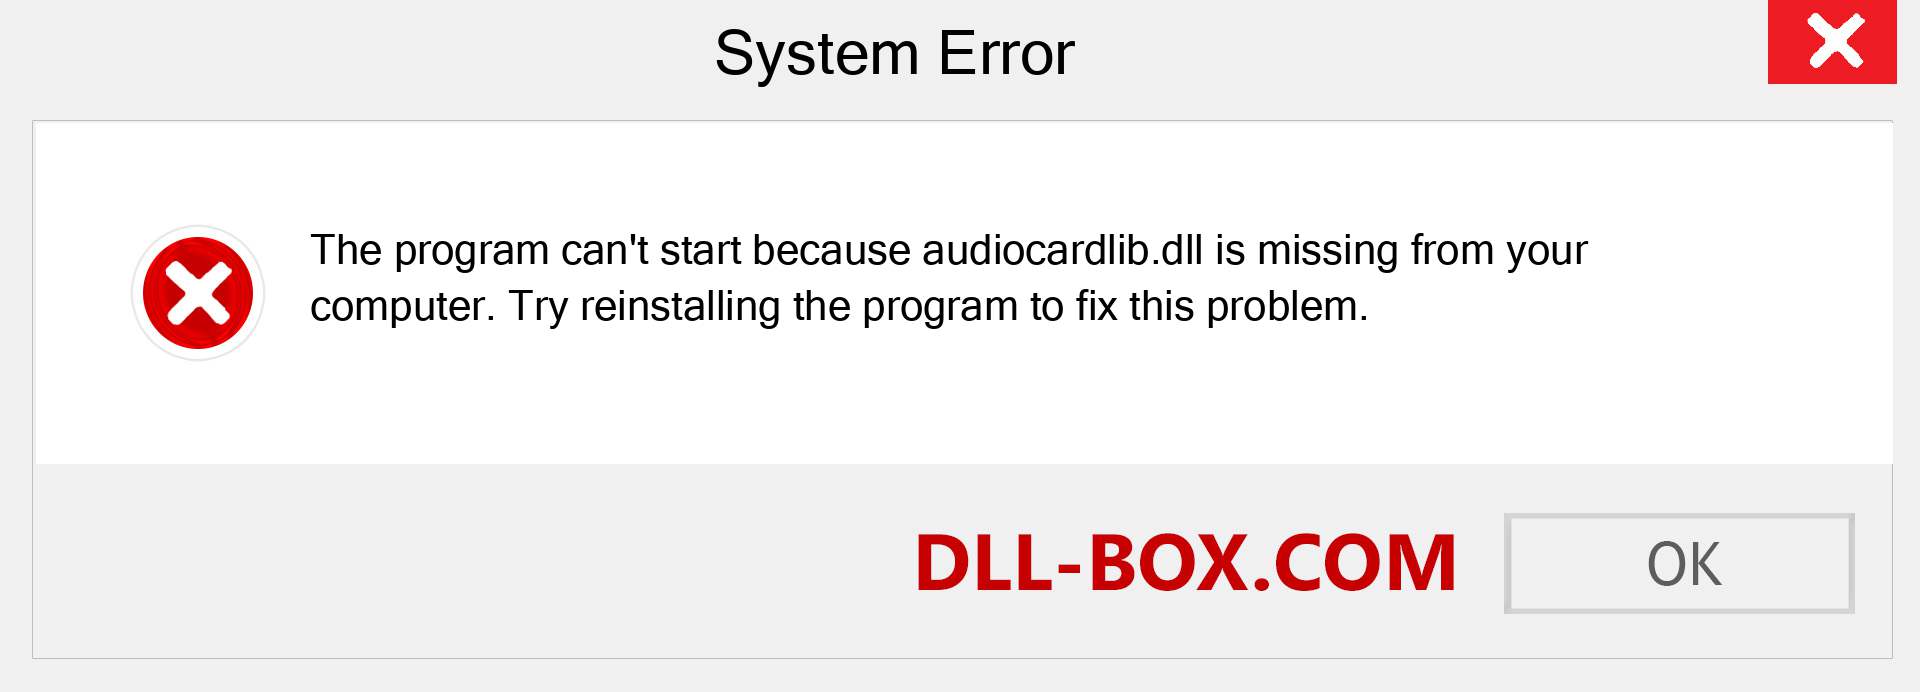  audiocardlib.dll file is missing?. Download for Windows 7, 8, 10 - Fix  audiocardlib dll Missing Error on Windows, photos, images